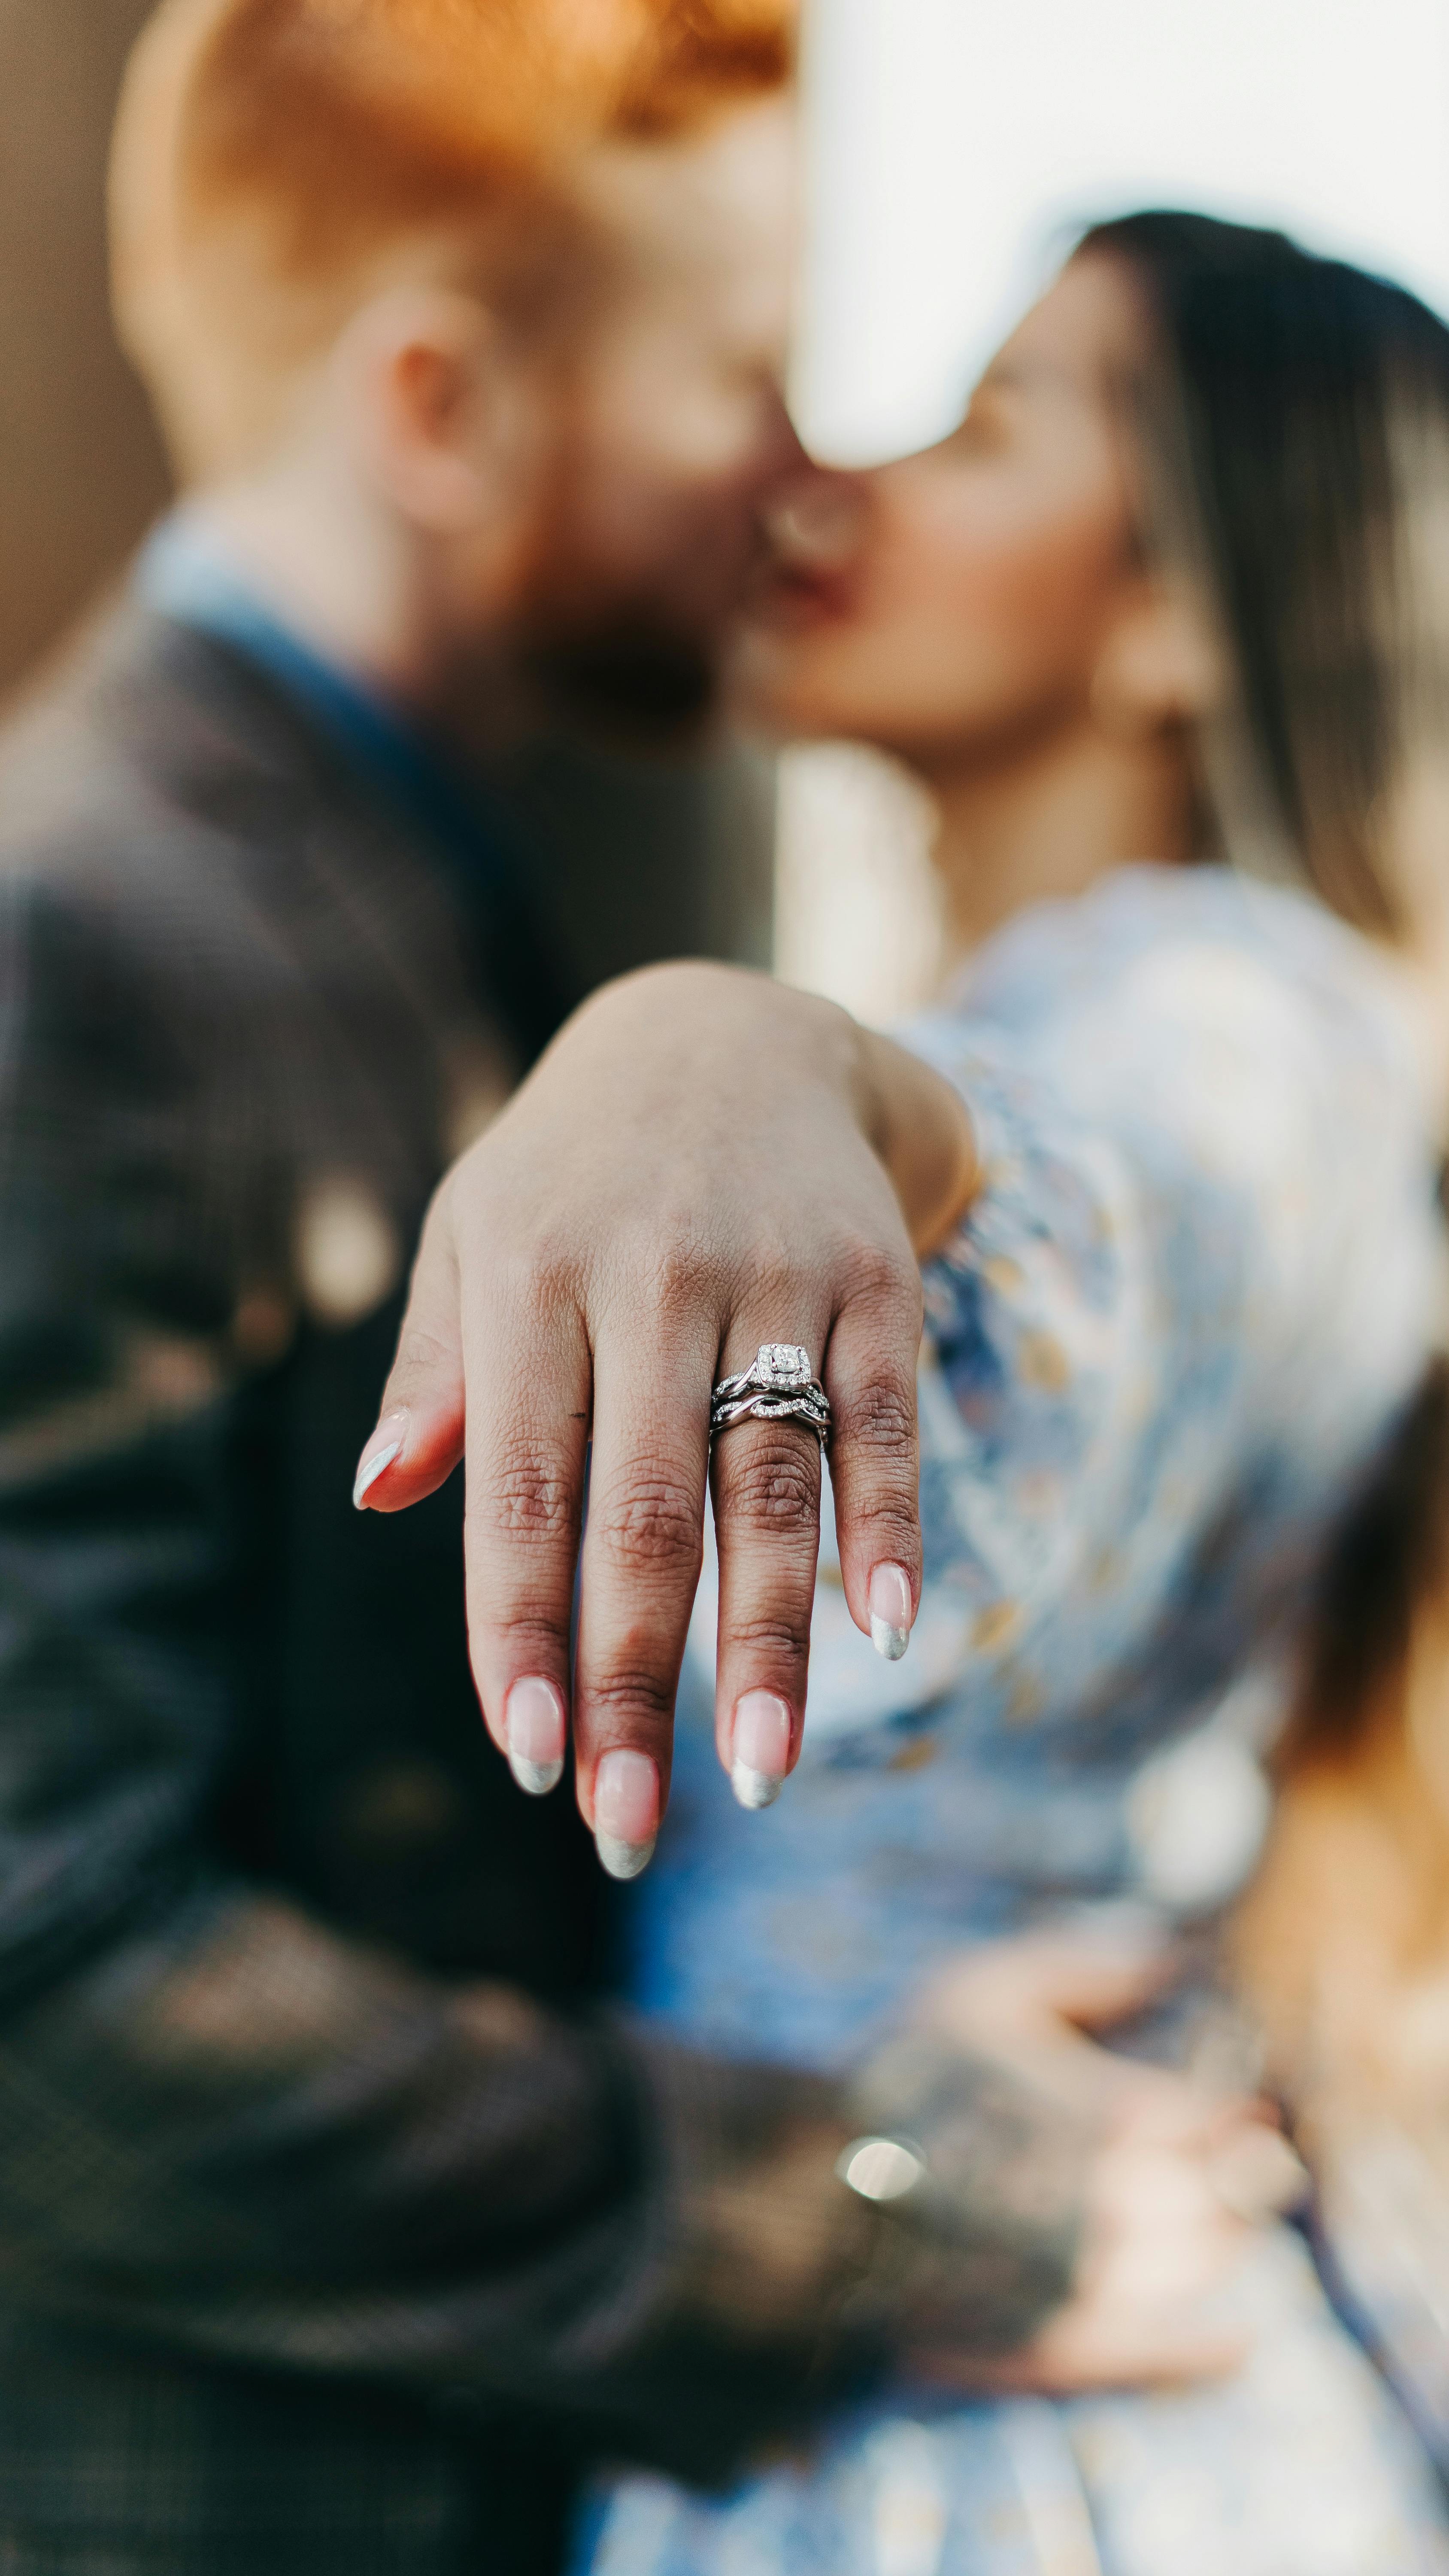 Indian Engagement Photography Ring Ceremony Pose Stock Photo 2056541720 |  Shutterstock